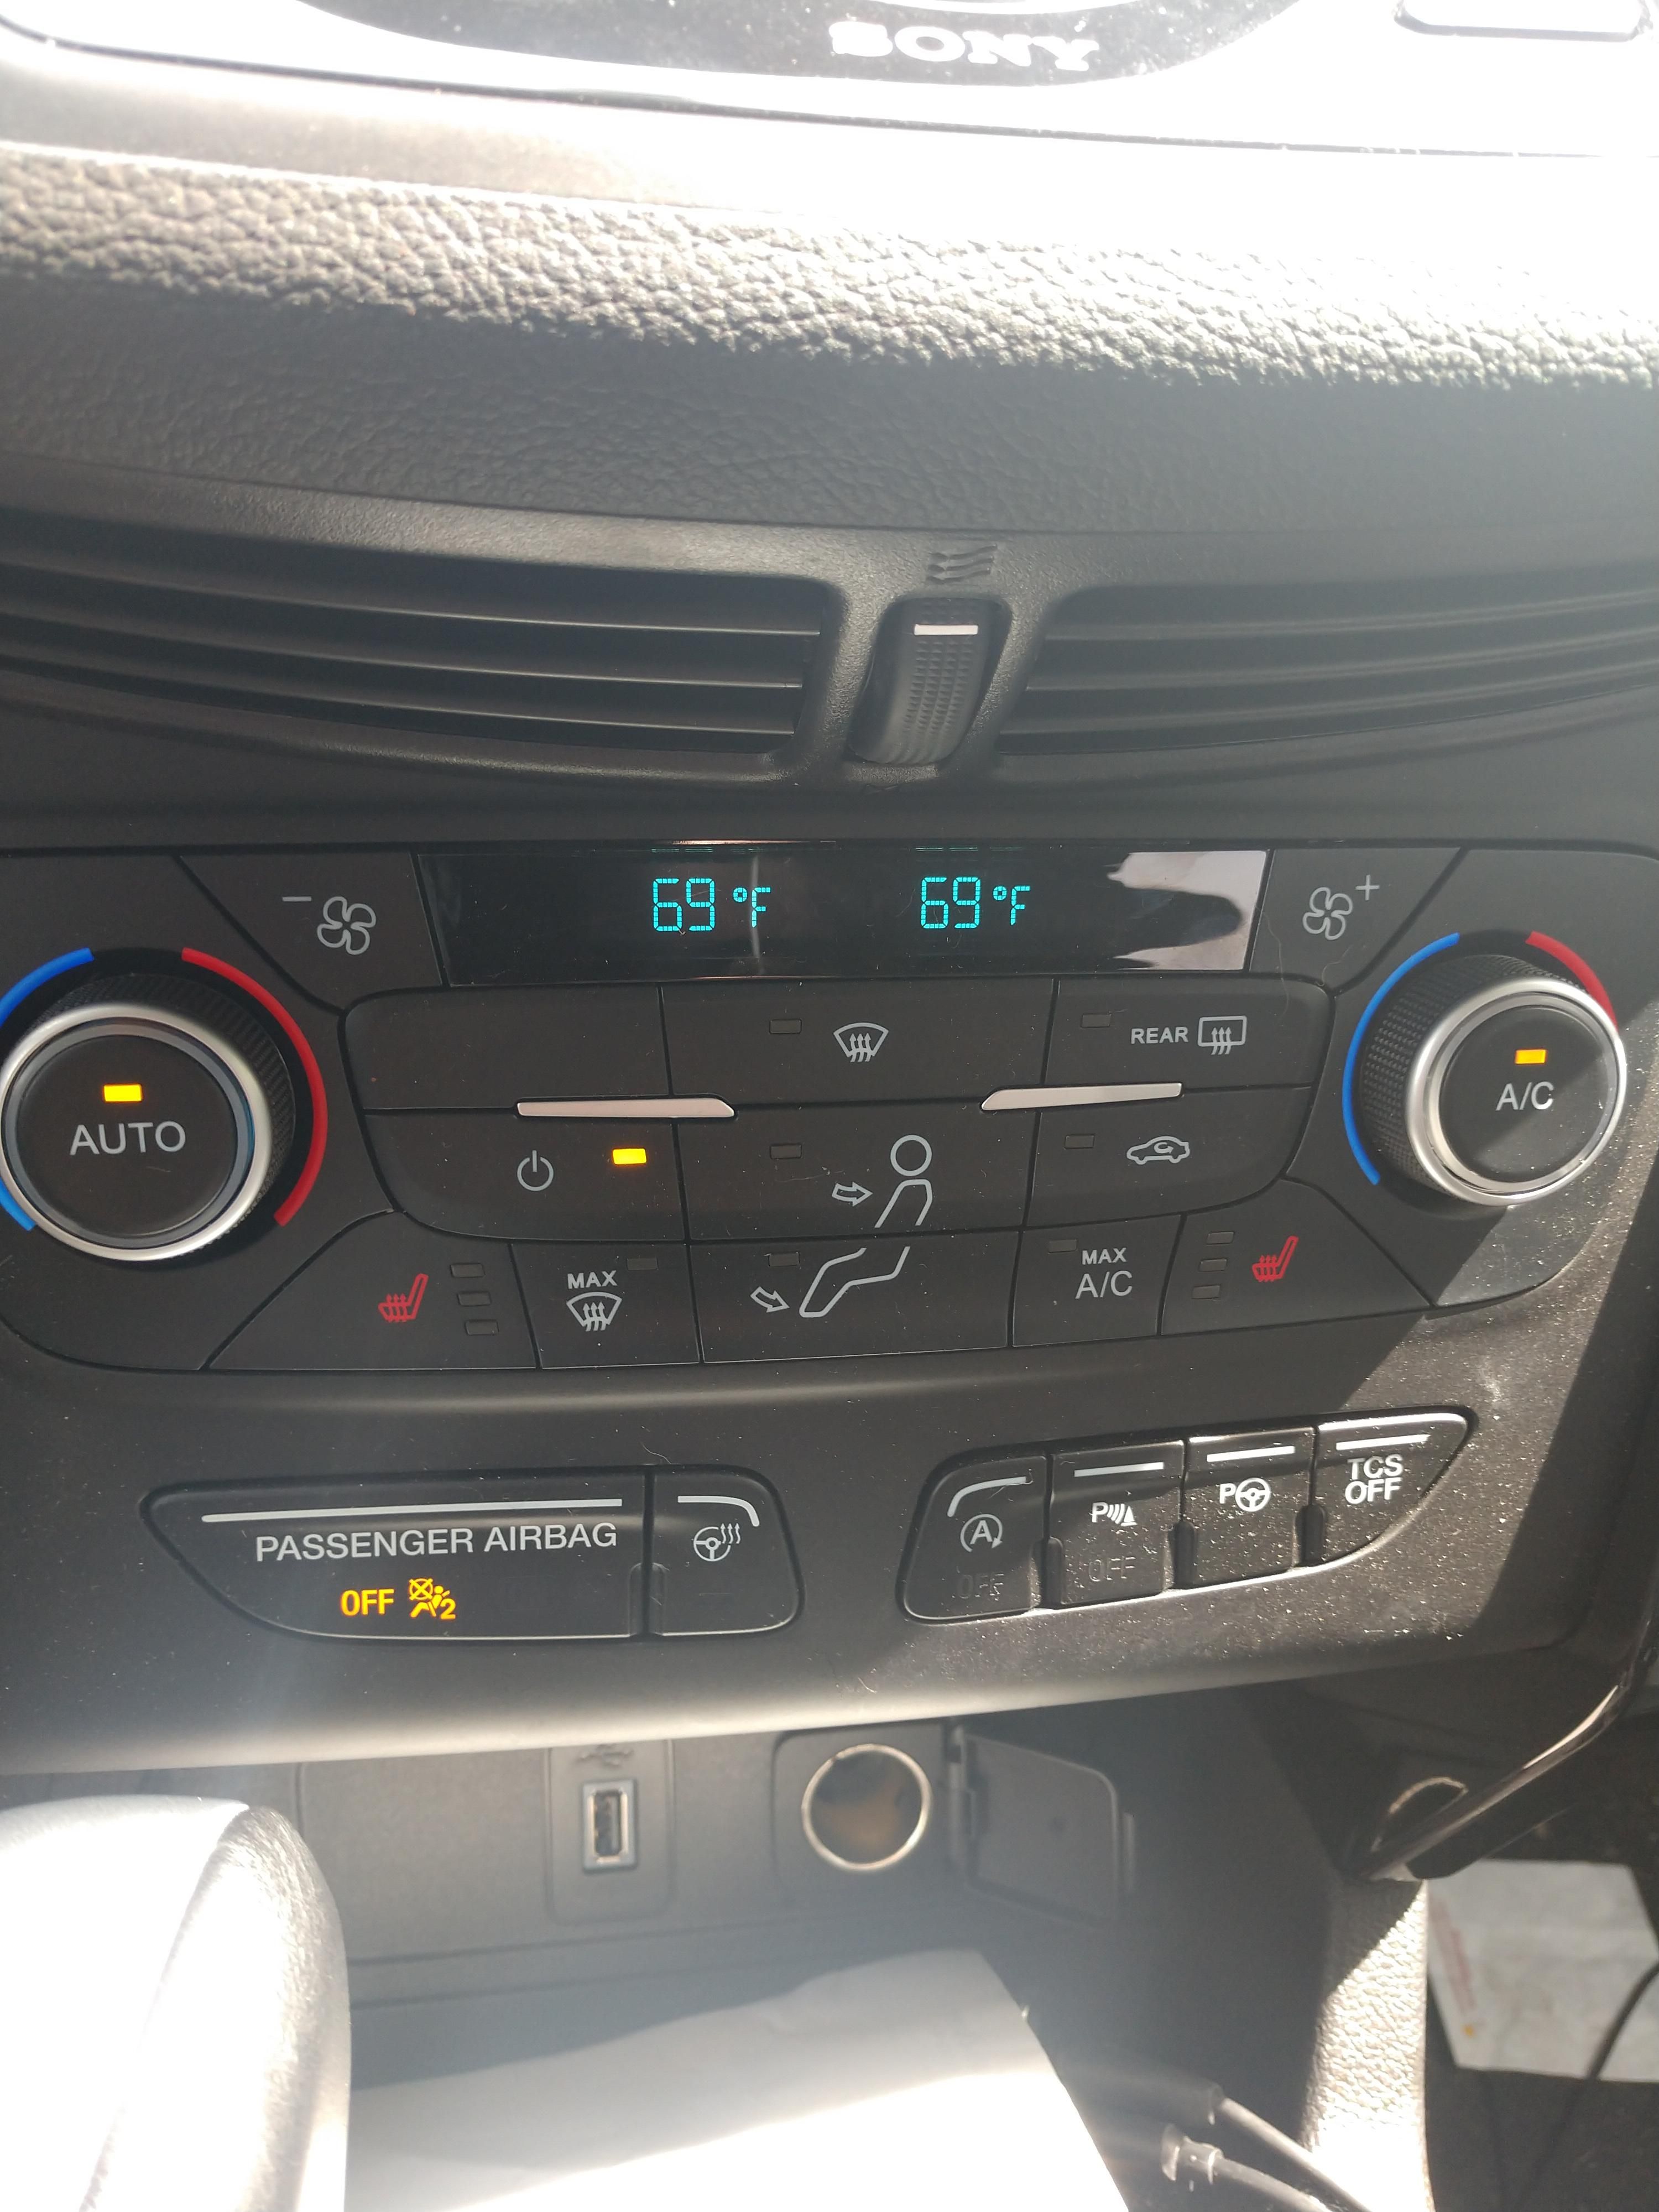 I'm 54 but I always set the temp in my car this way because inside I'm 12.